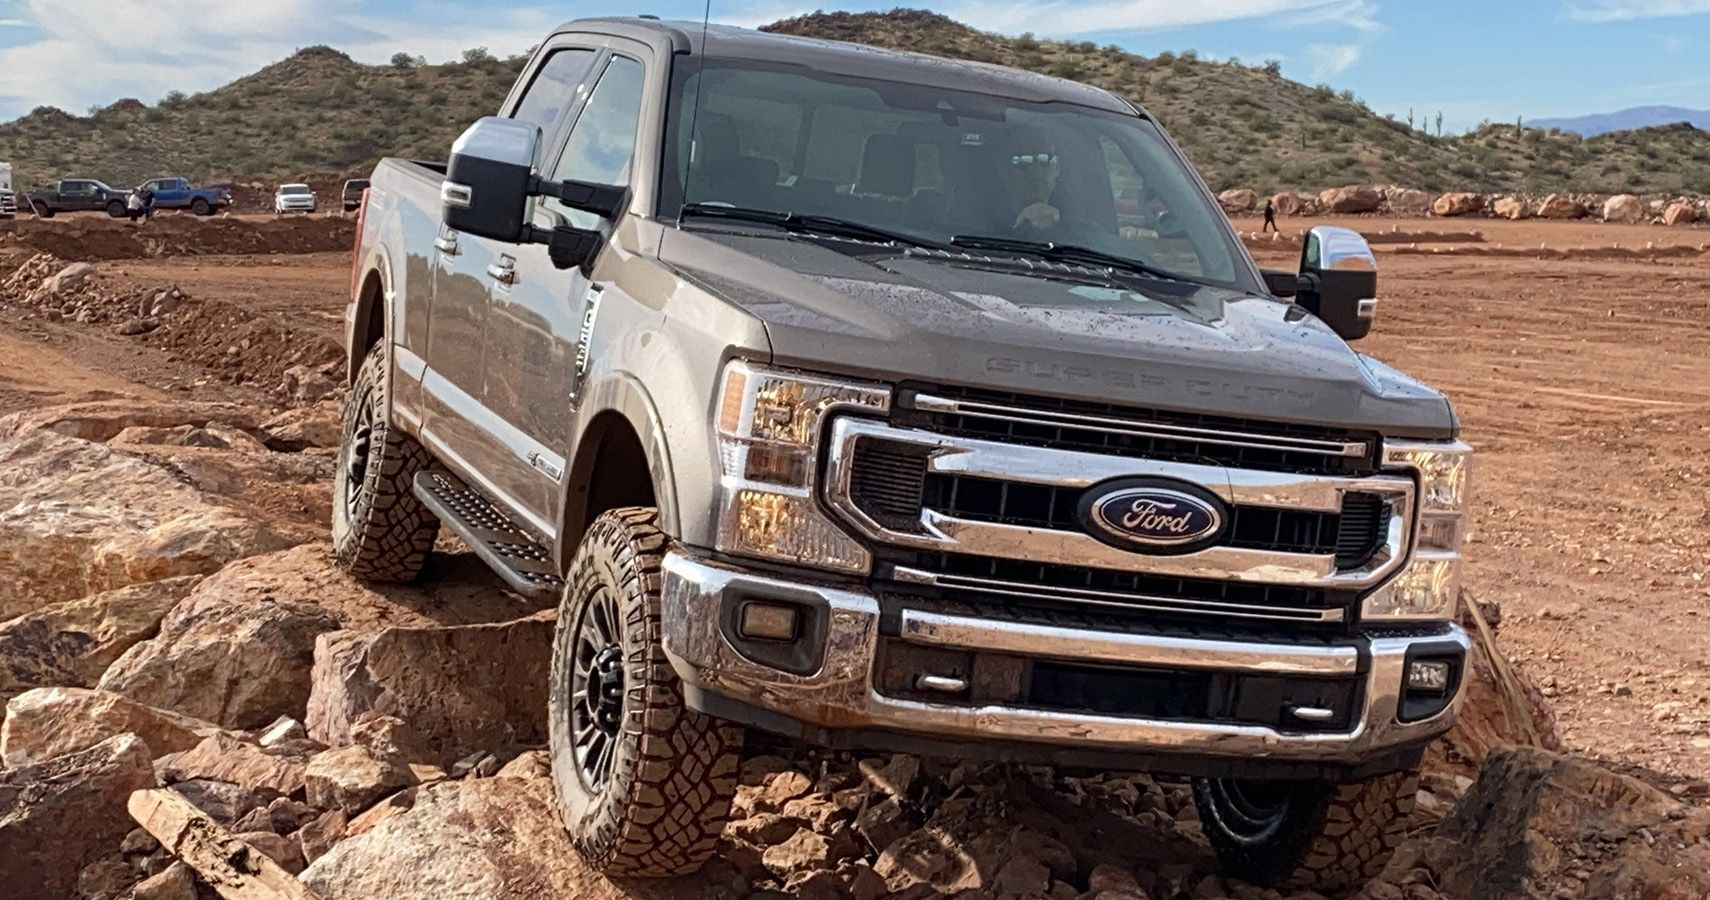 Forget Raptor, Here’s A Quake: 2020 Ford F-Series Super Duty Tremor